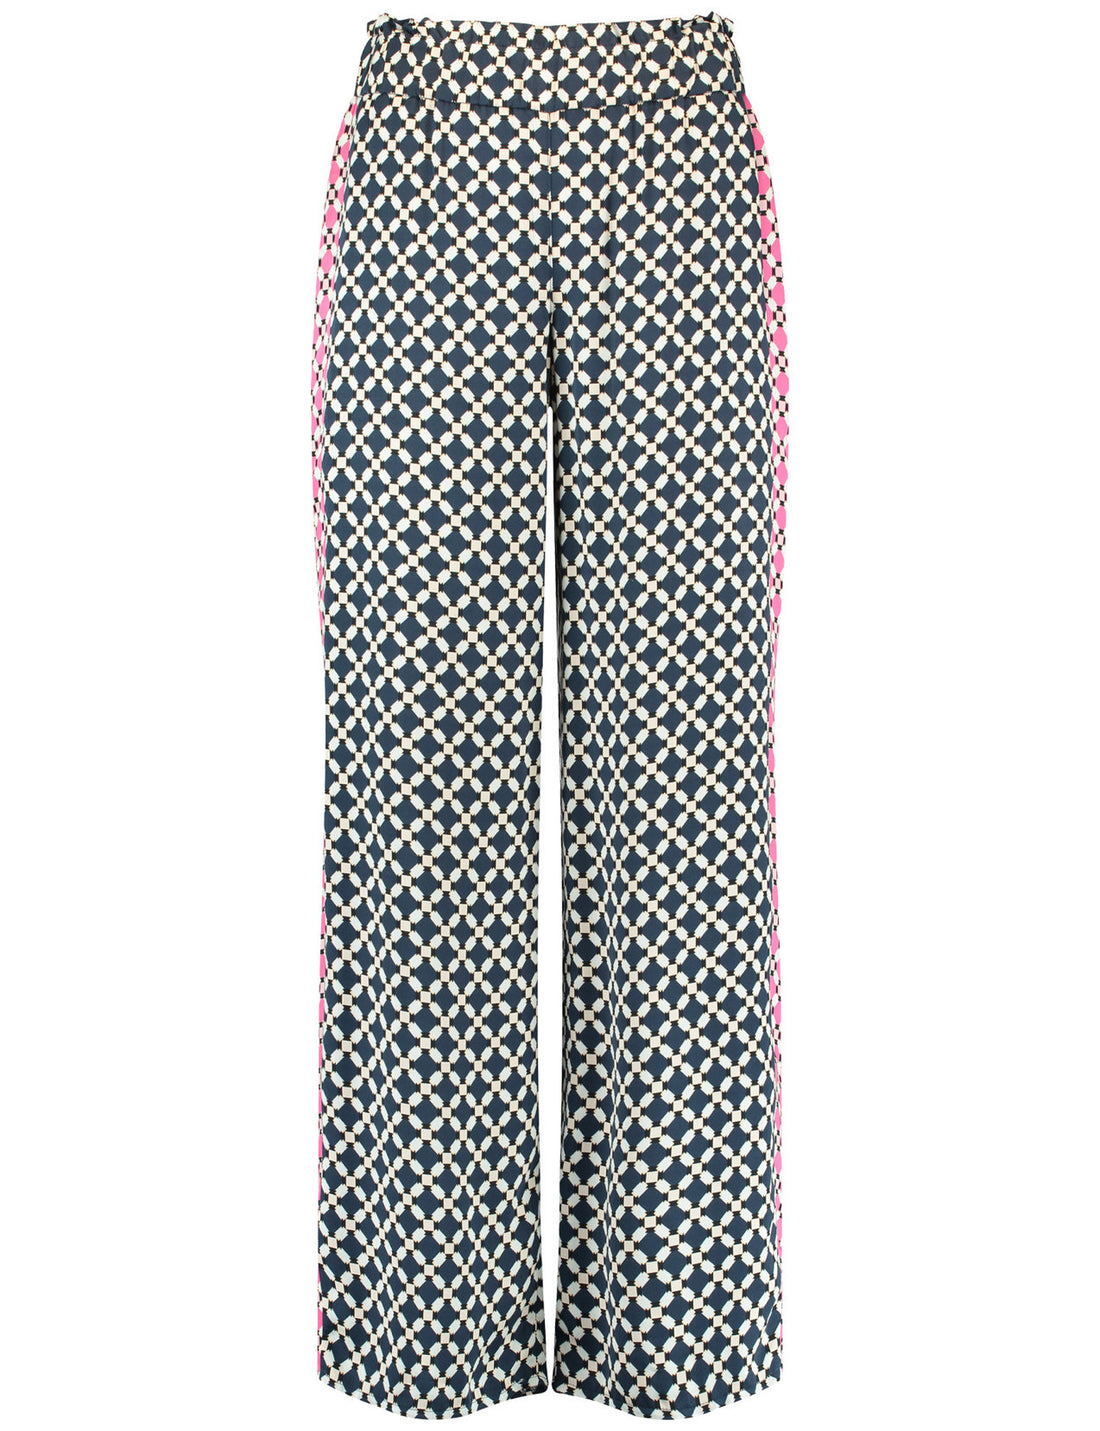 Slip On Trousers With All Over Print_222209-66430_3099_01